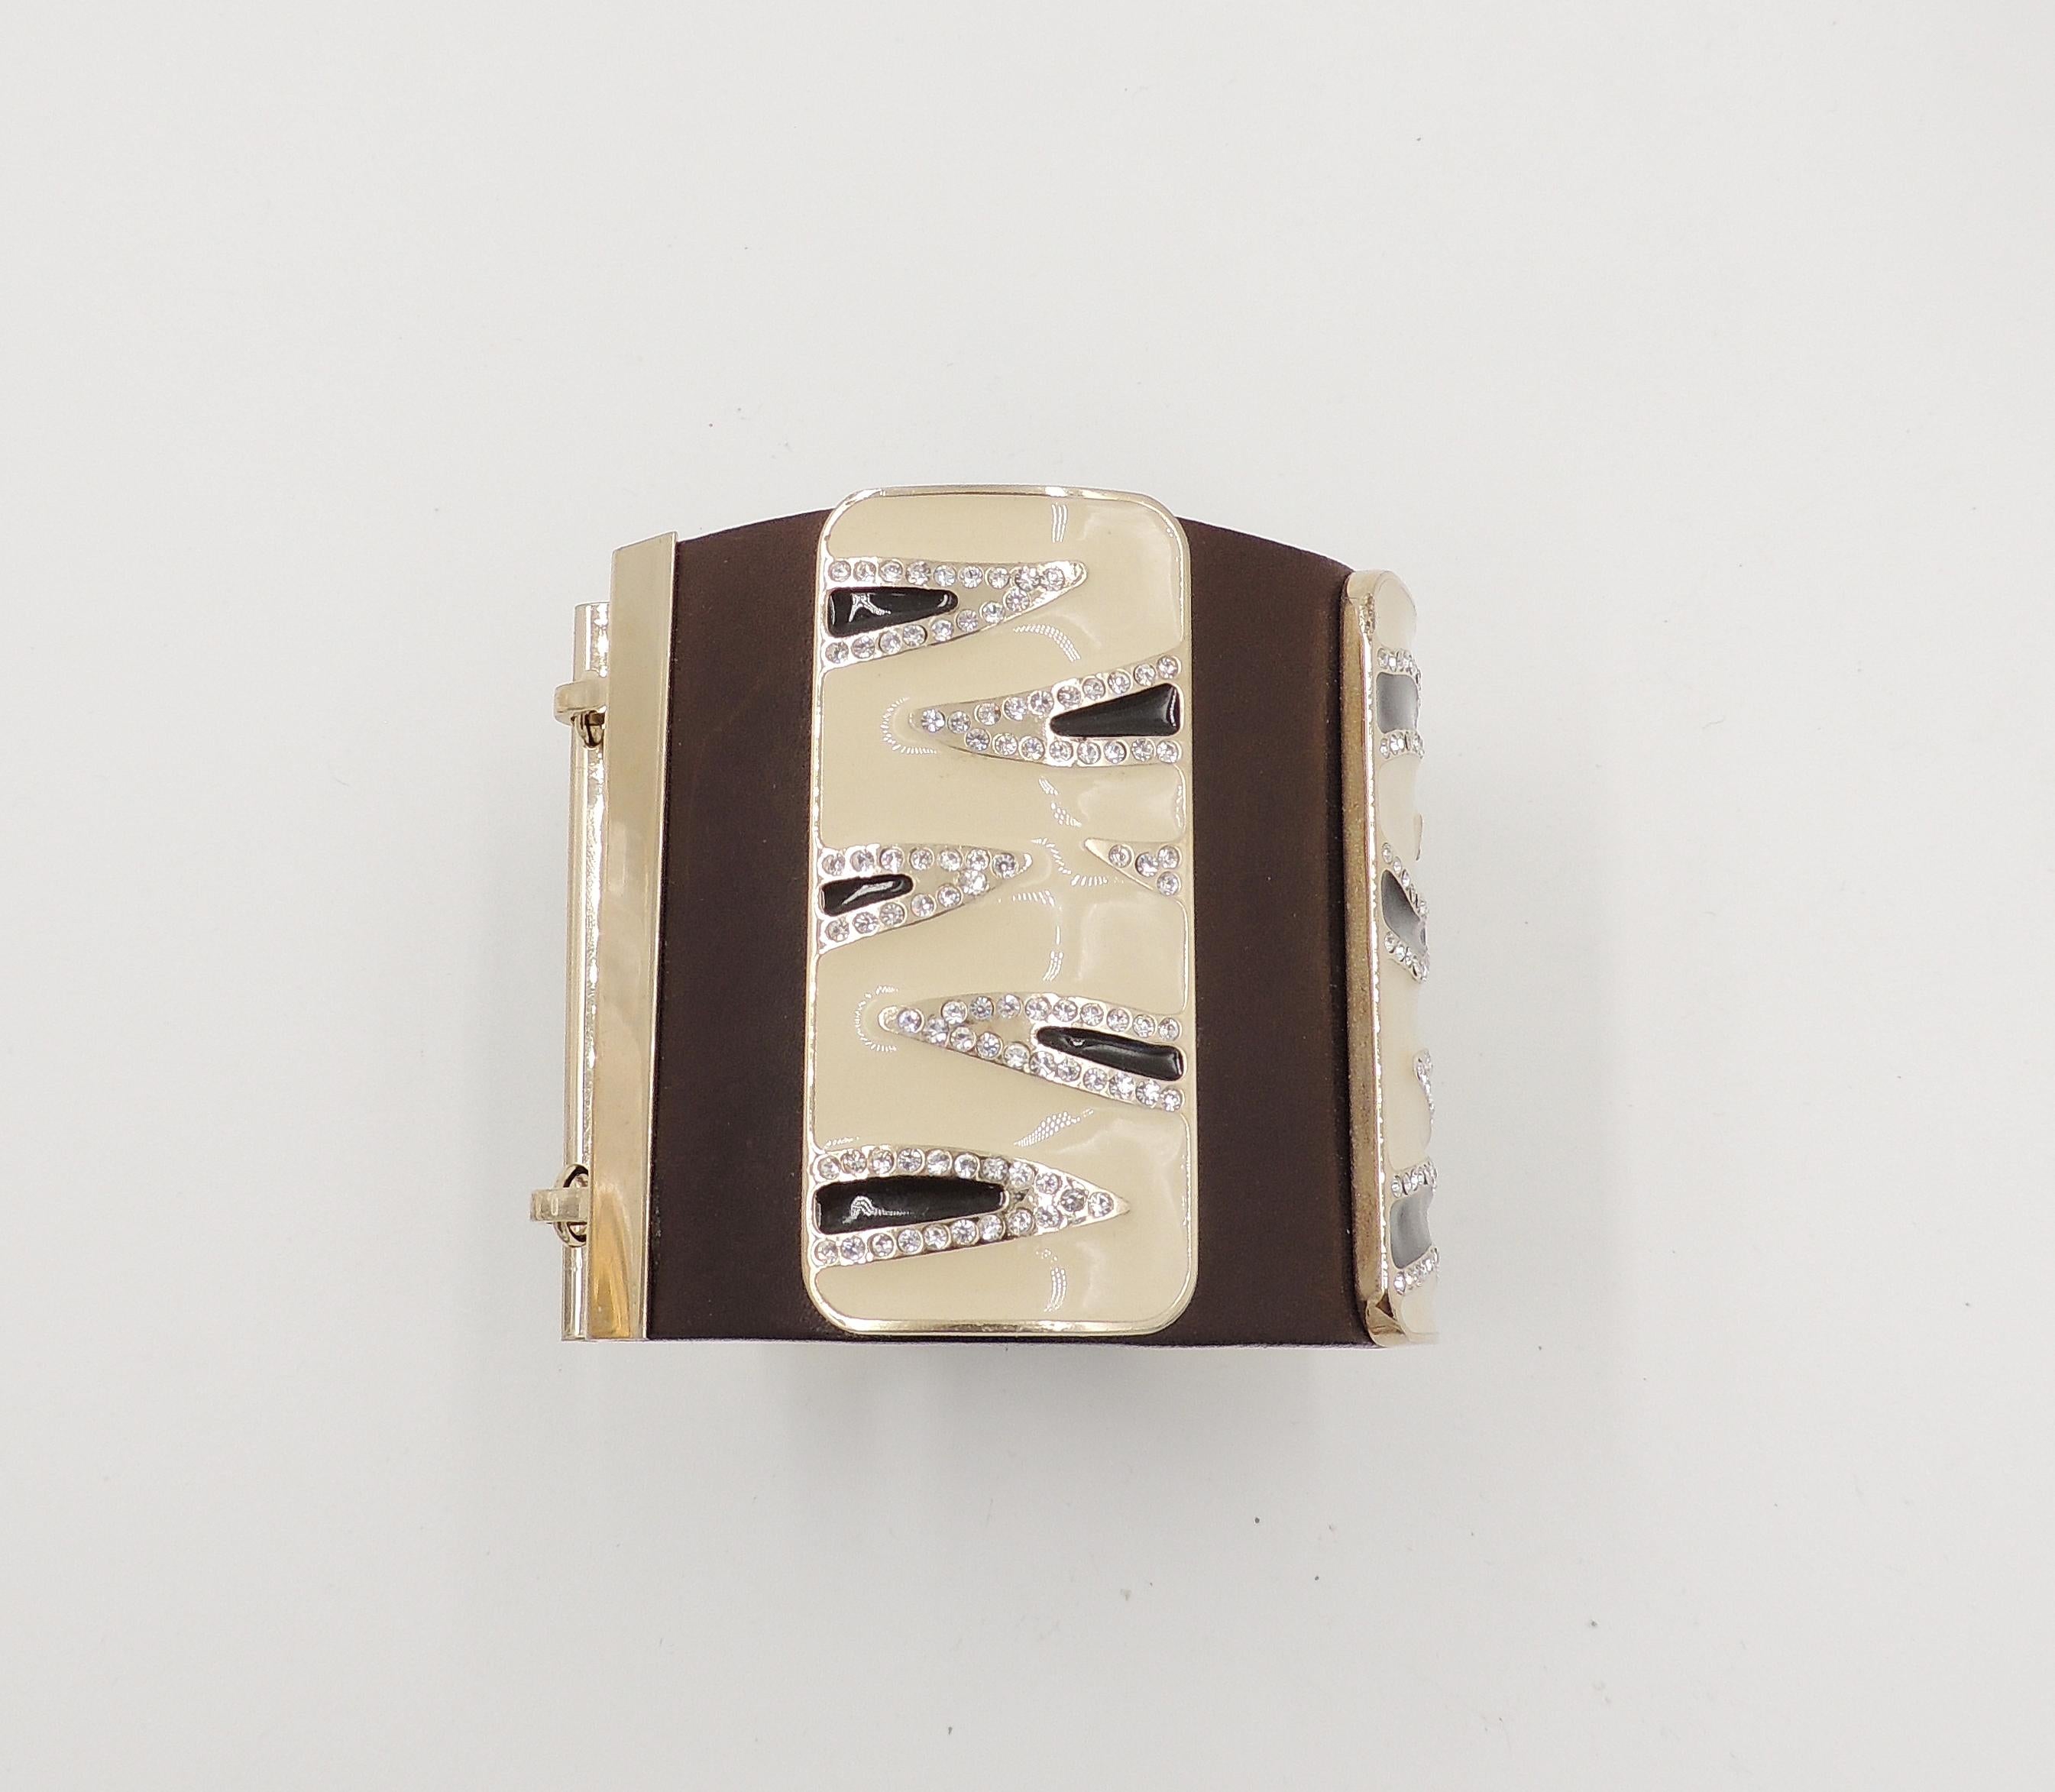 1980s or 90s gold plated leather with three zebra stripe black and white enamel plaques and rhinestone accents cuff bracelet with double hook clasp. Marked with Valentino Garavani's 